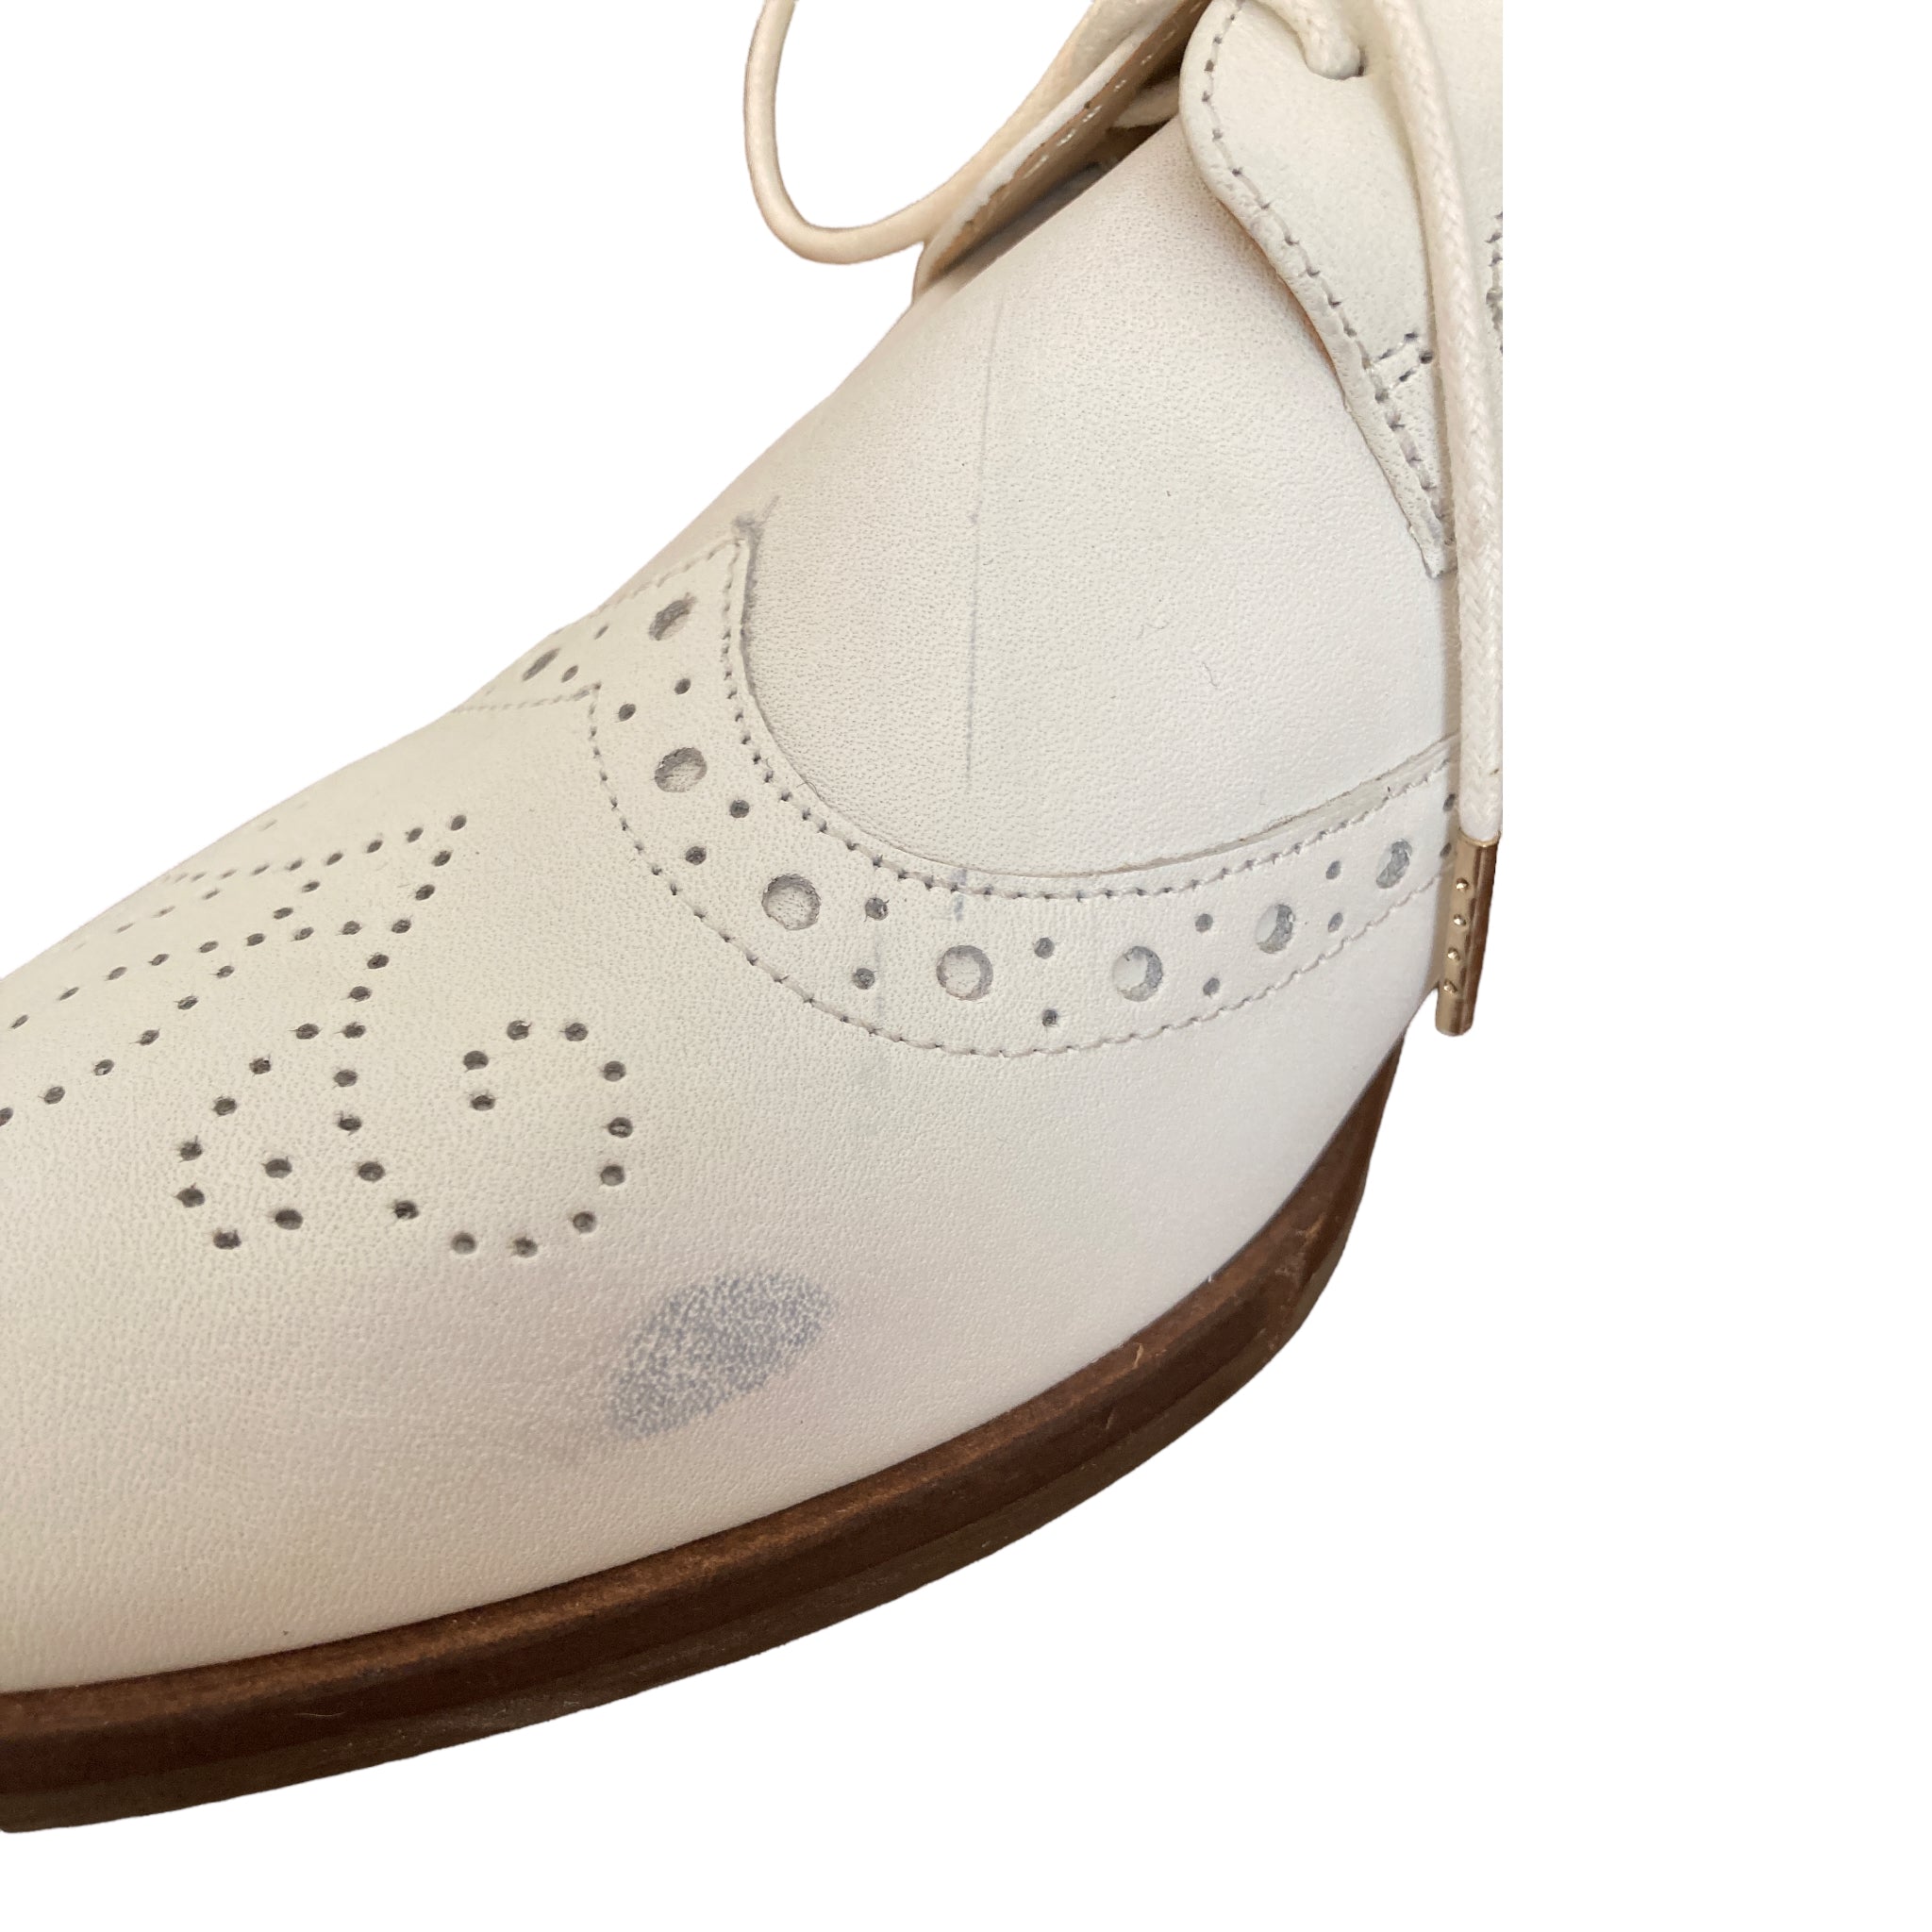 University student environment commonplace Bocage Innovation Wingtip White Shoes, 39 – Second Serve